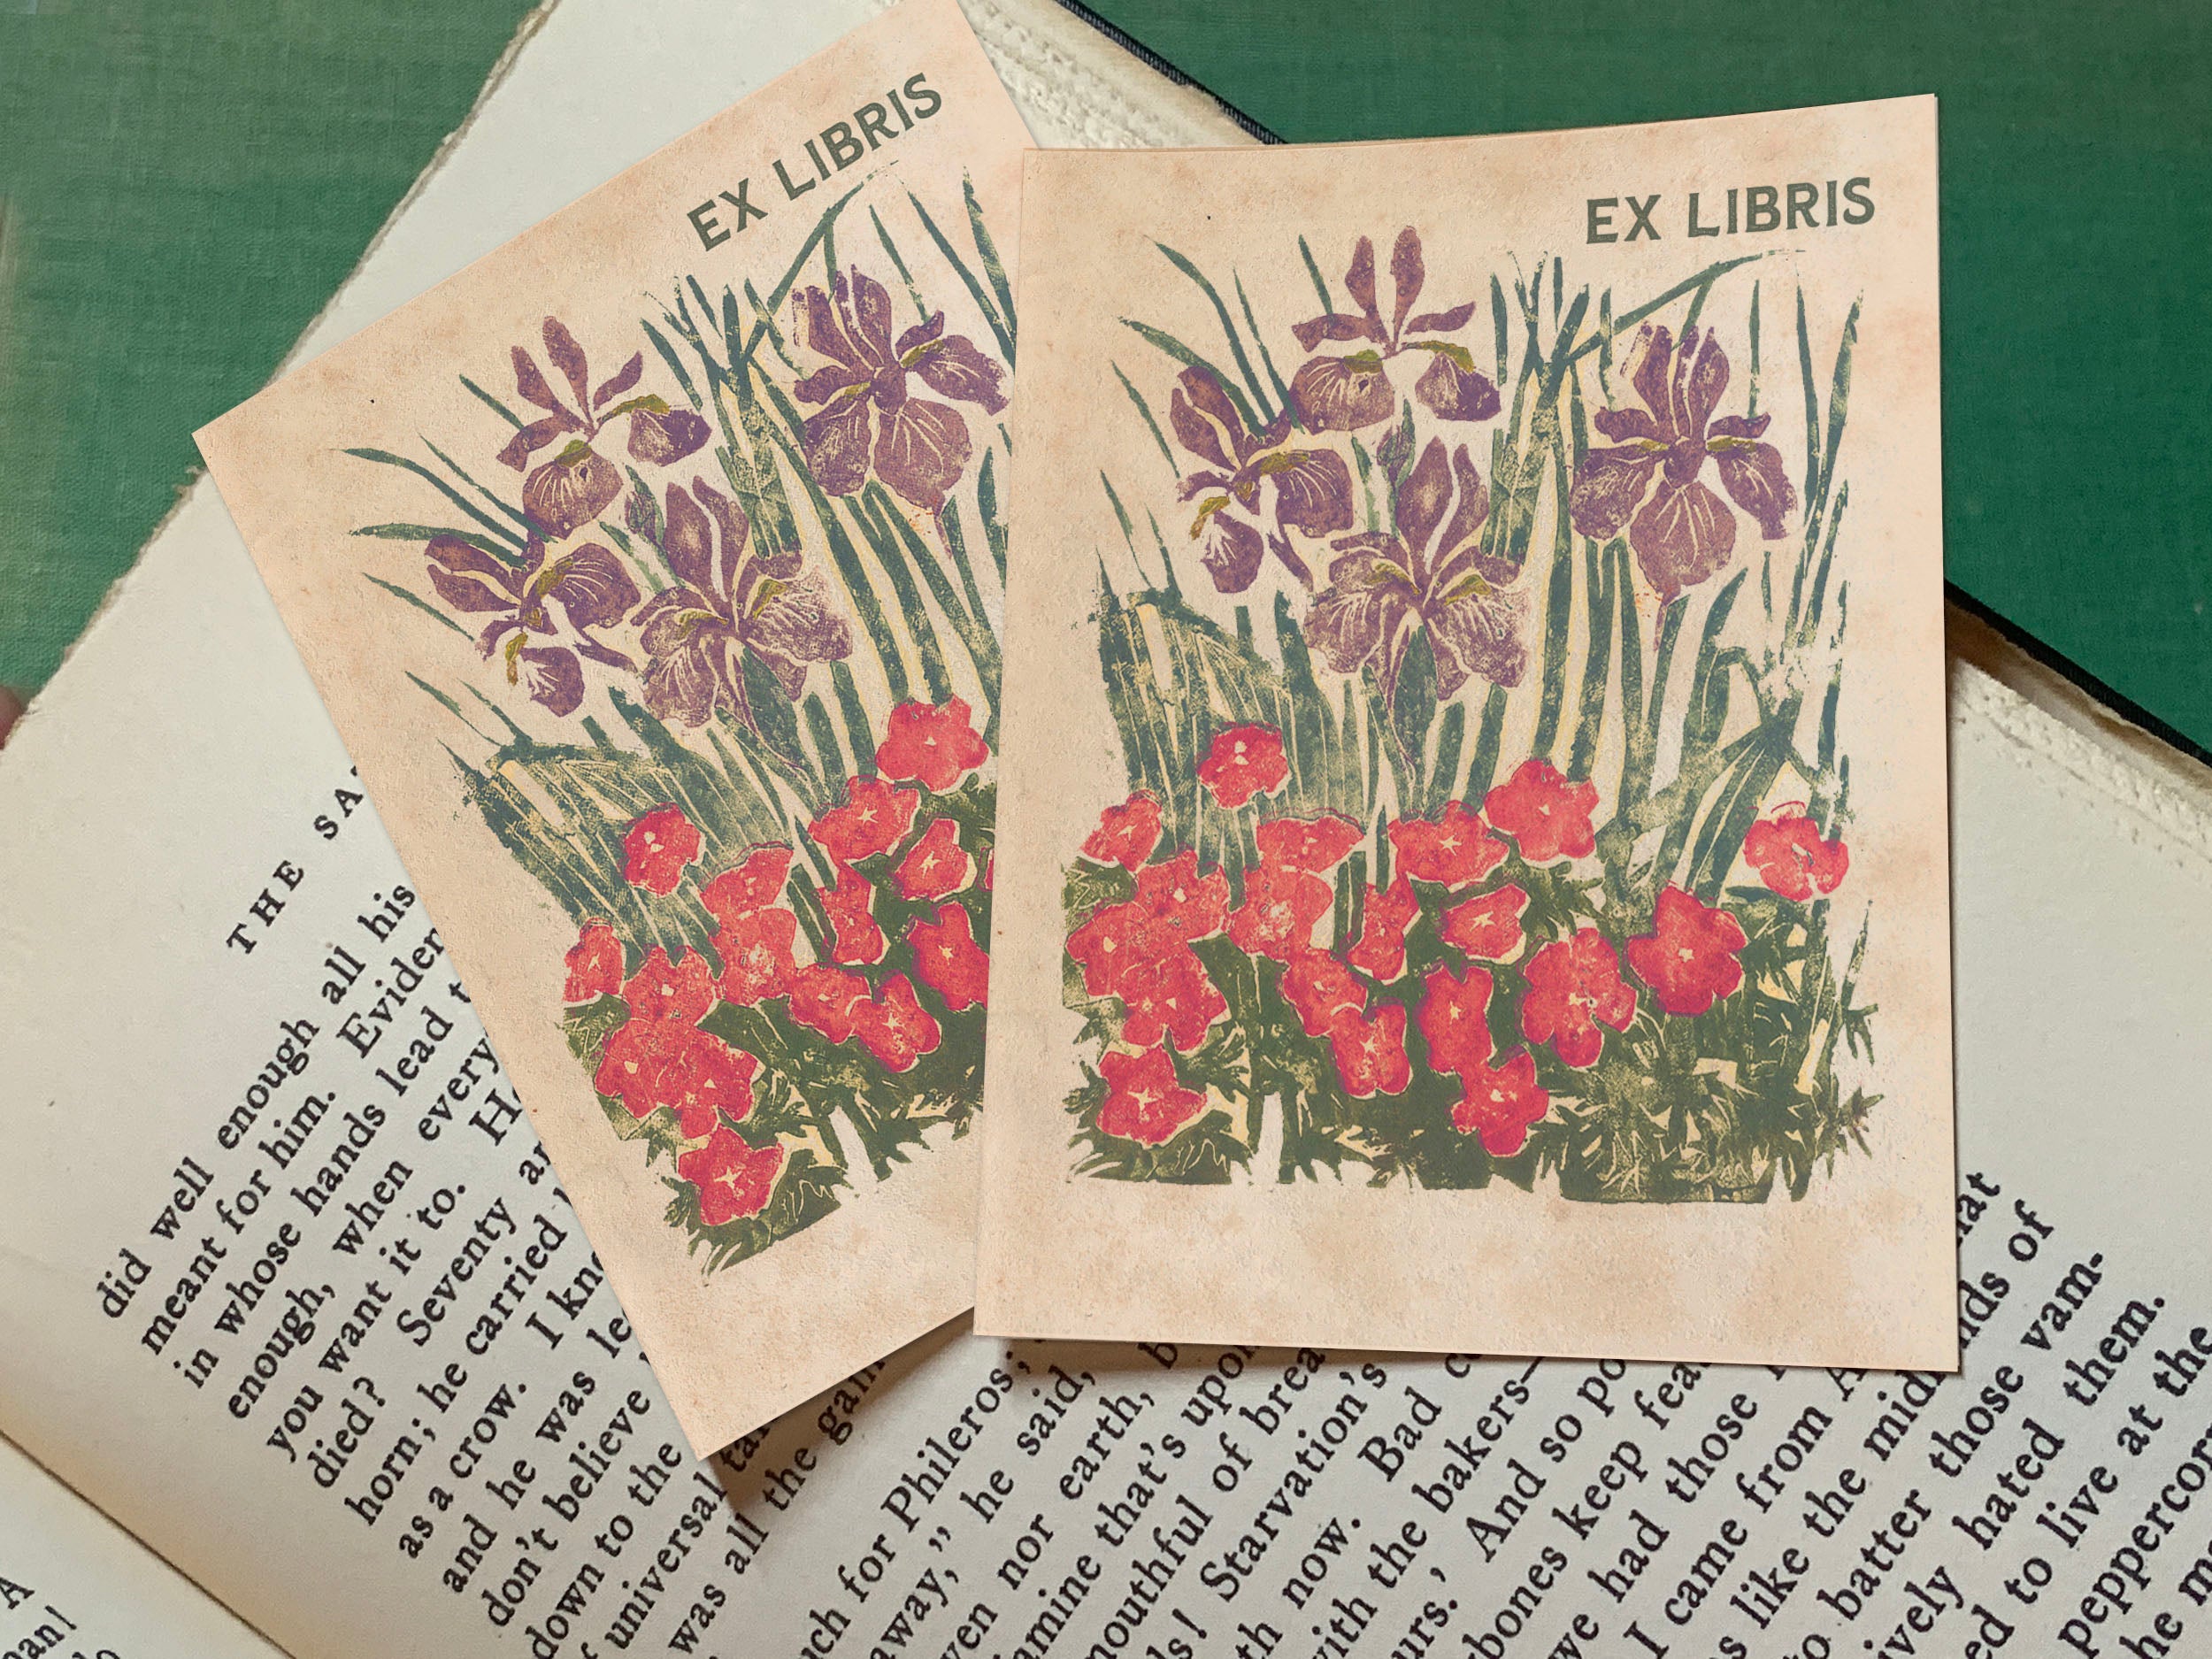 Summer Irises, Personalized Ex-Libris Bookplates, Crafted on Traditional Gummed Paper, 4in x 3in, Set of 30